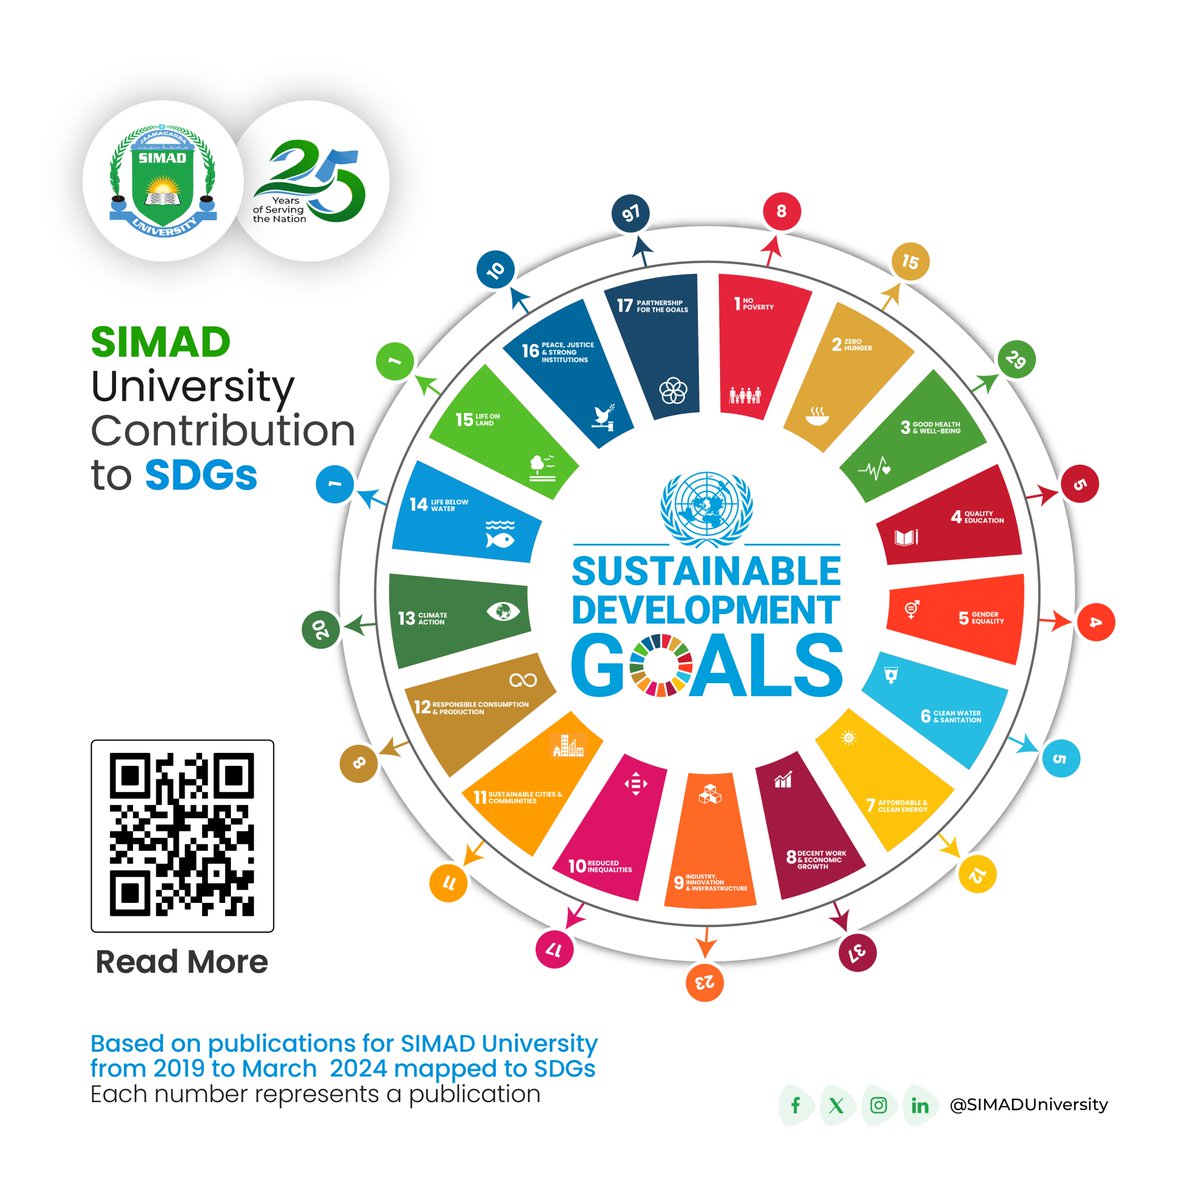 According to Elsevier SDG data mapping, SIMAD University is the only institution in Somalia whose research efforts align with all 17 Sustainable Development Goals (SDGs). This achievement reflects our commitment to academic excellence and making a positive contribution to global